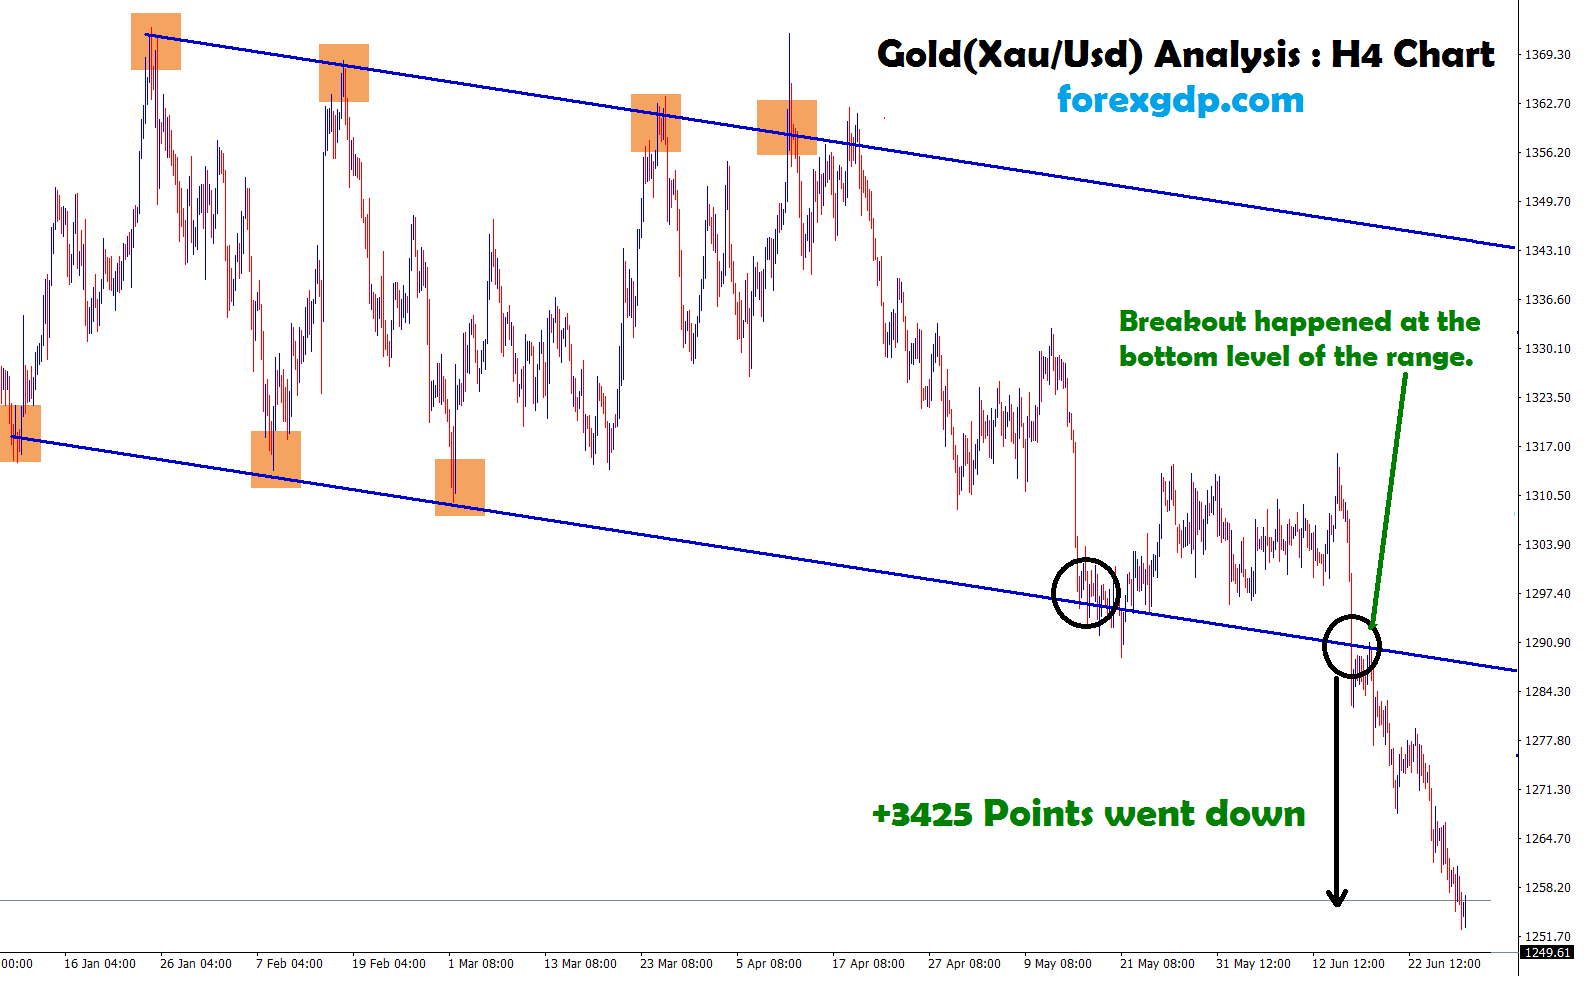 breakout happened at the bottom level of the range in gold